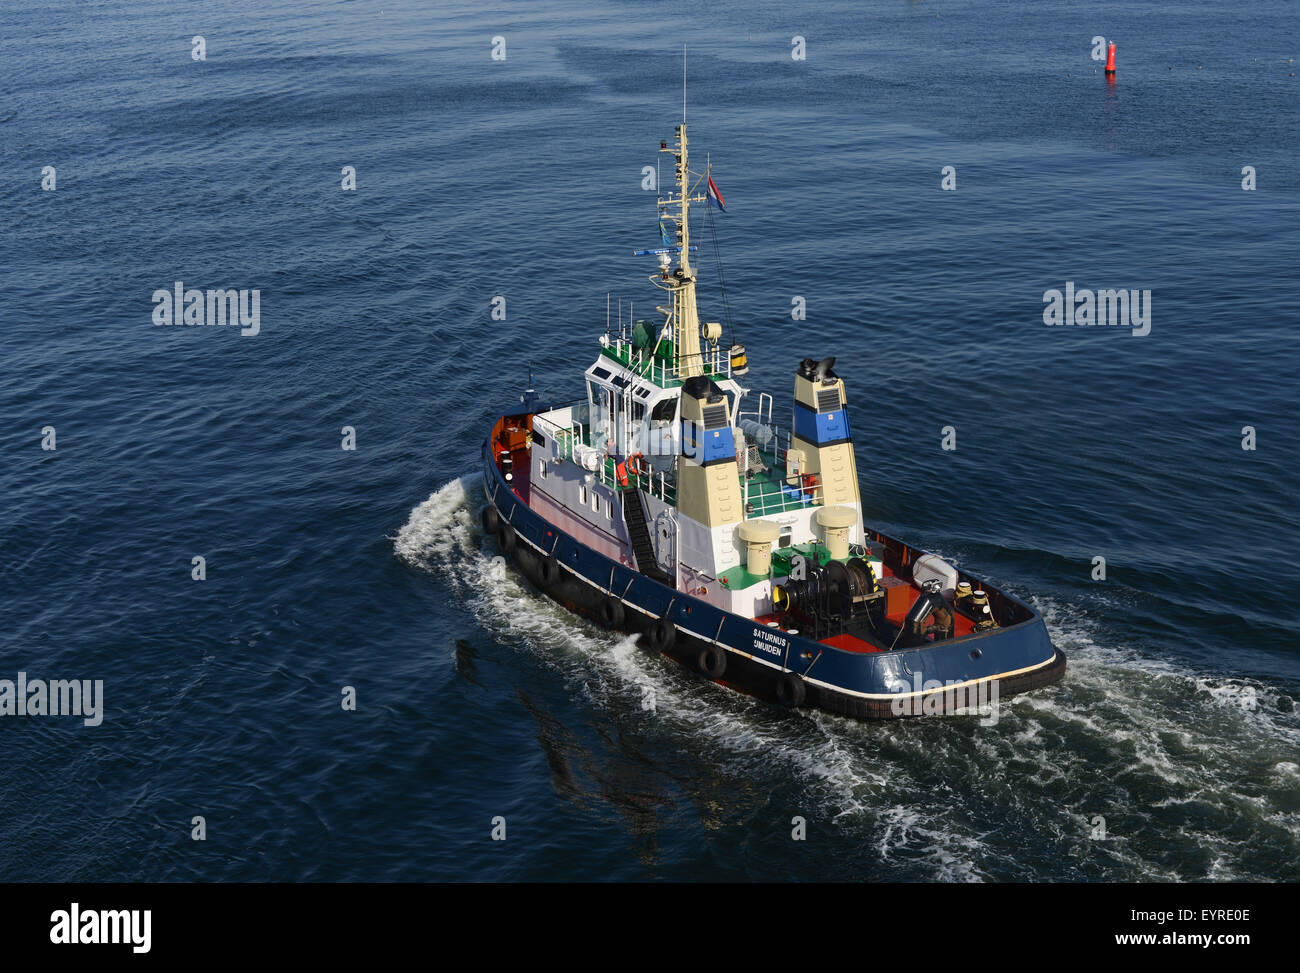 The tugboat Saturnus operated by Iskes Towage and Salvage in IJmuiden Stock Photo